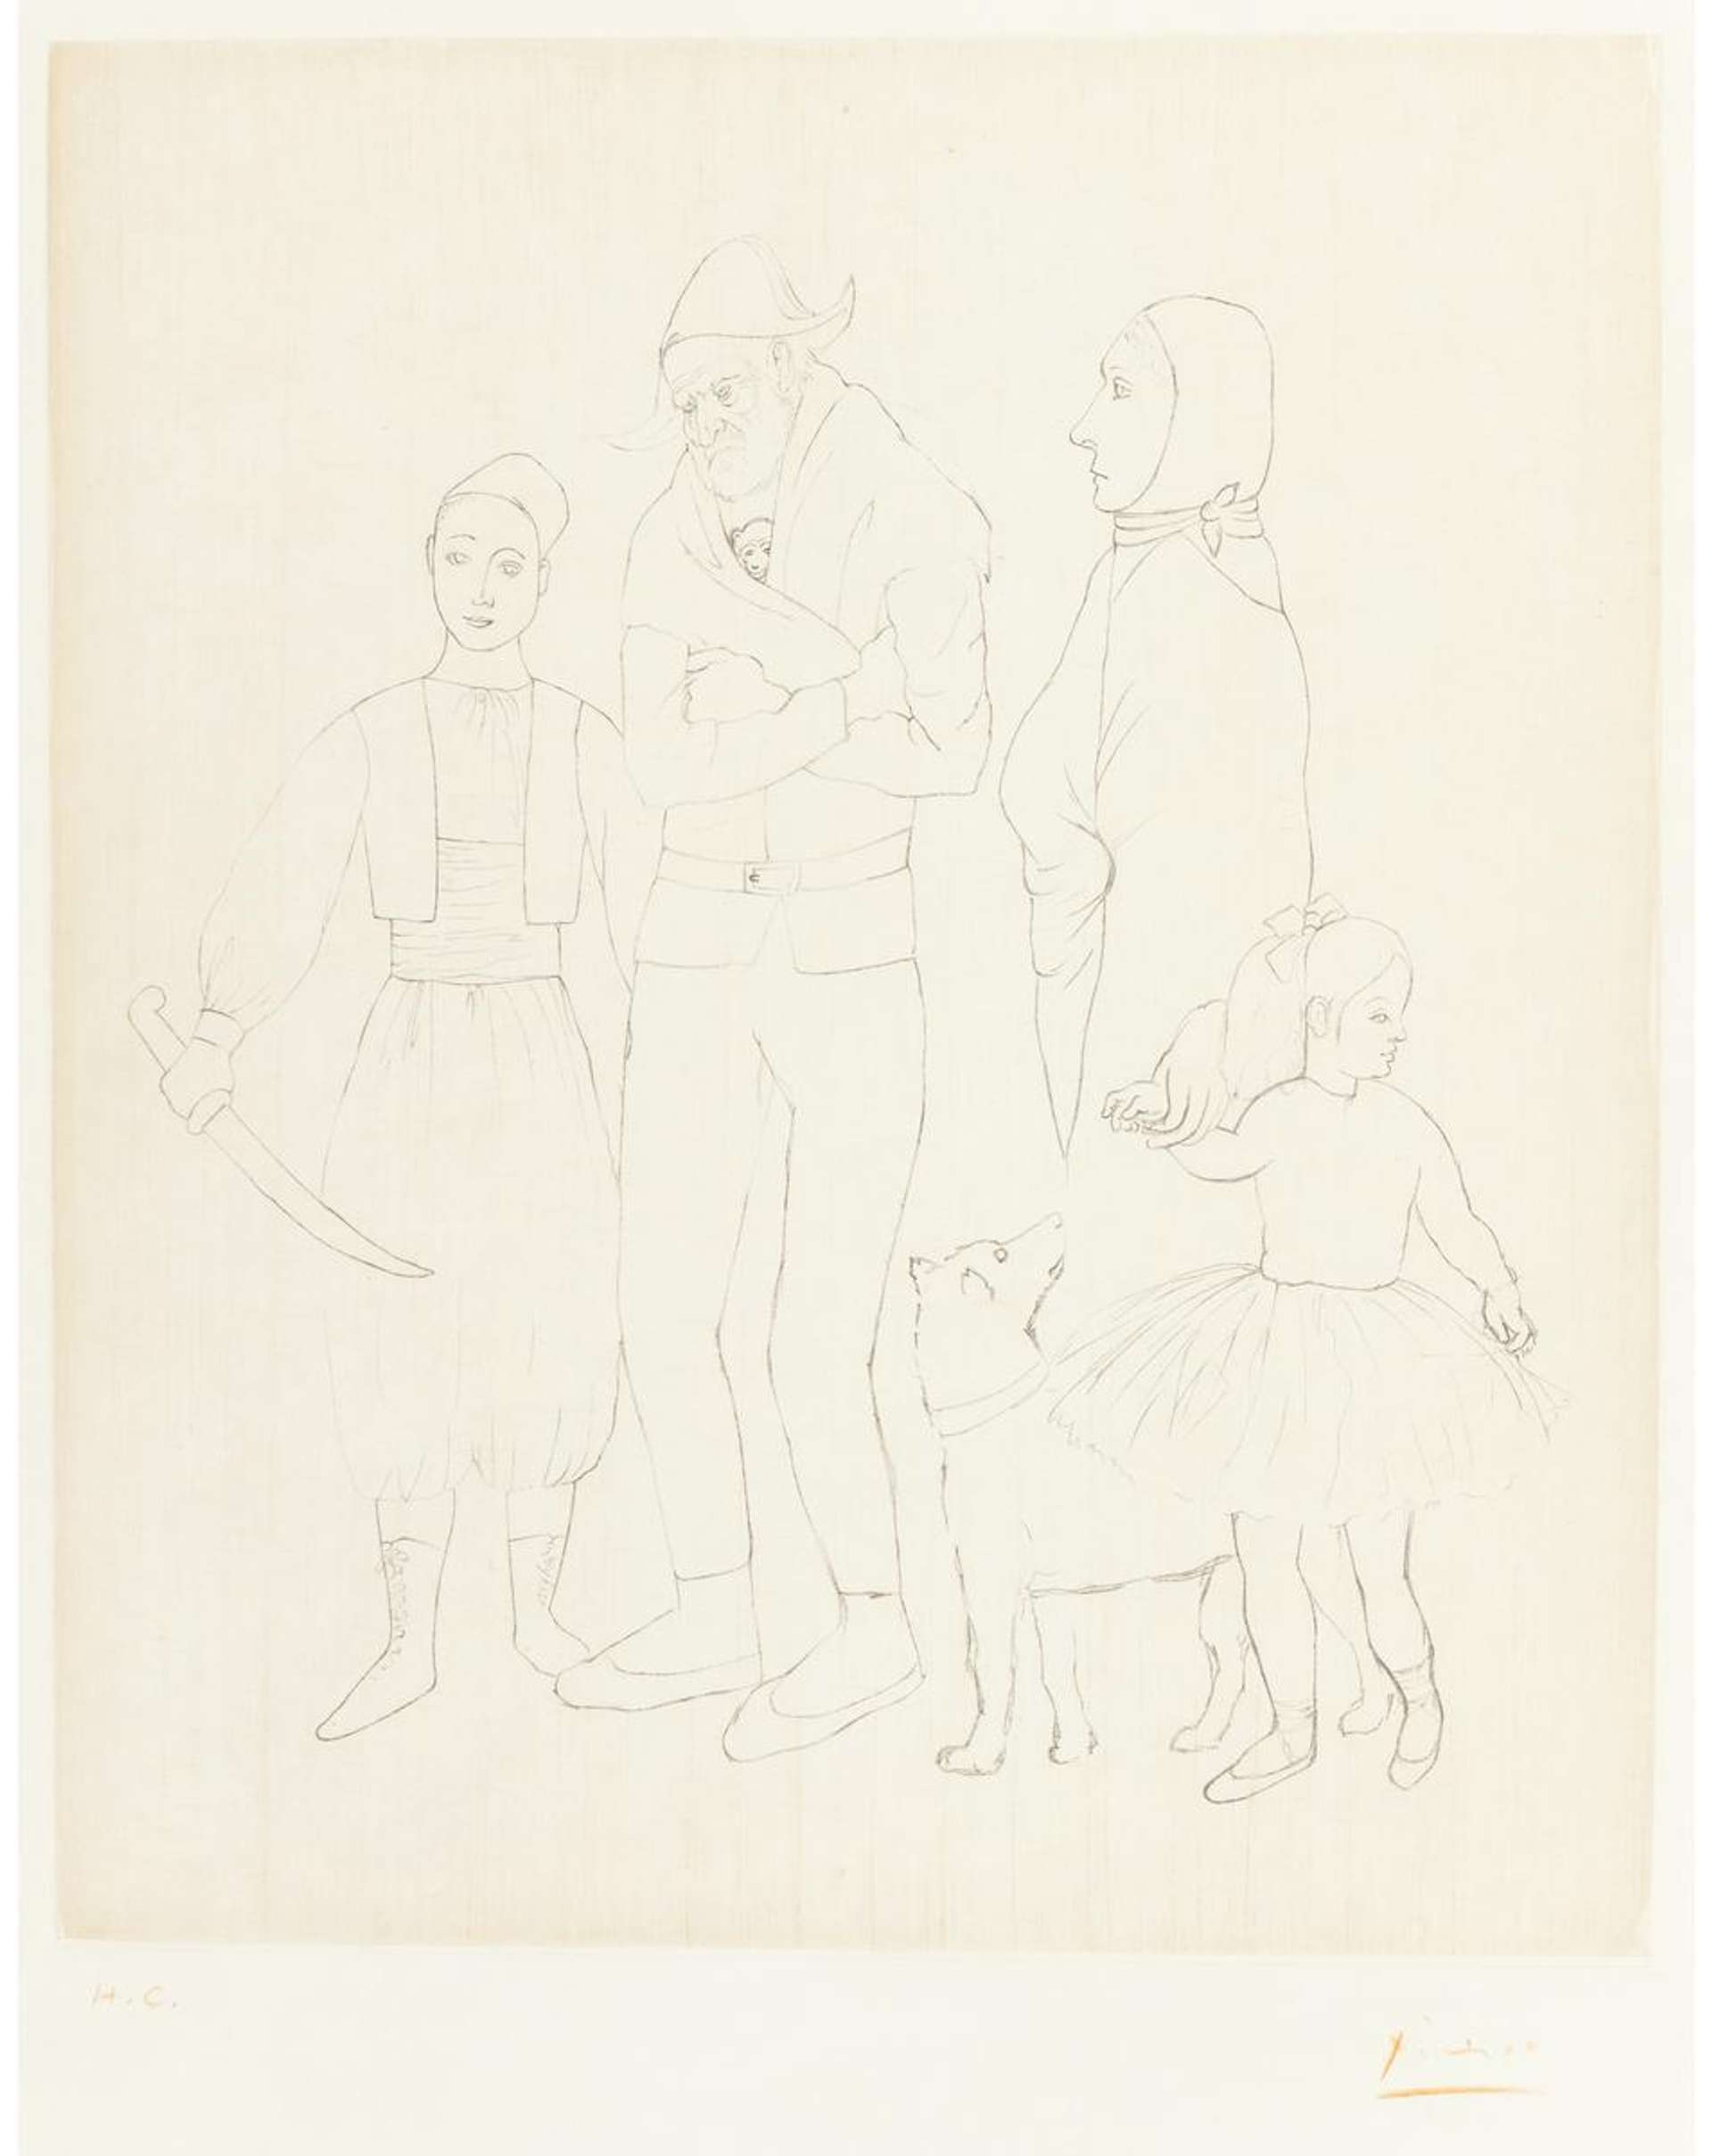 This line drawing by Pablo Picasso shows a family of saltimbanques. The mother is shown holding a girl's hand.